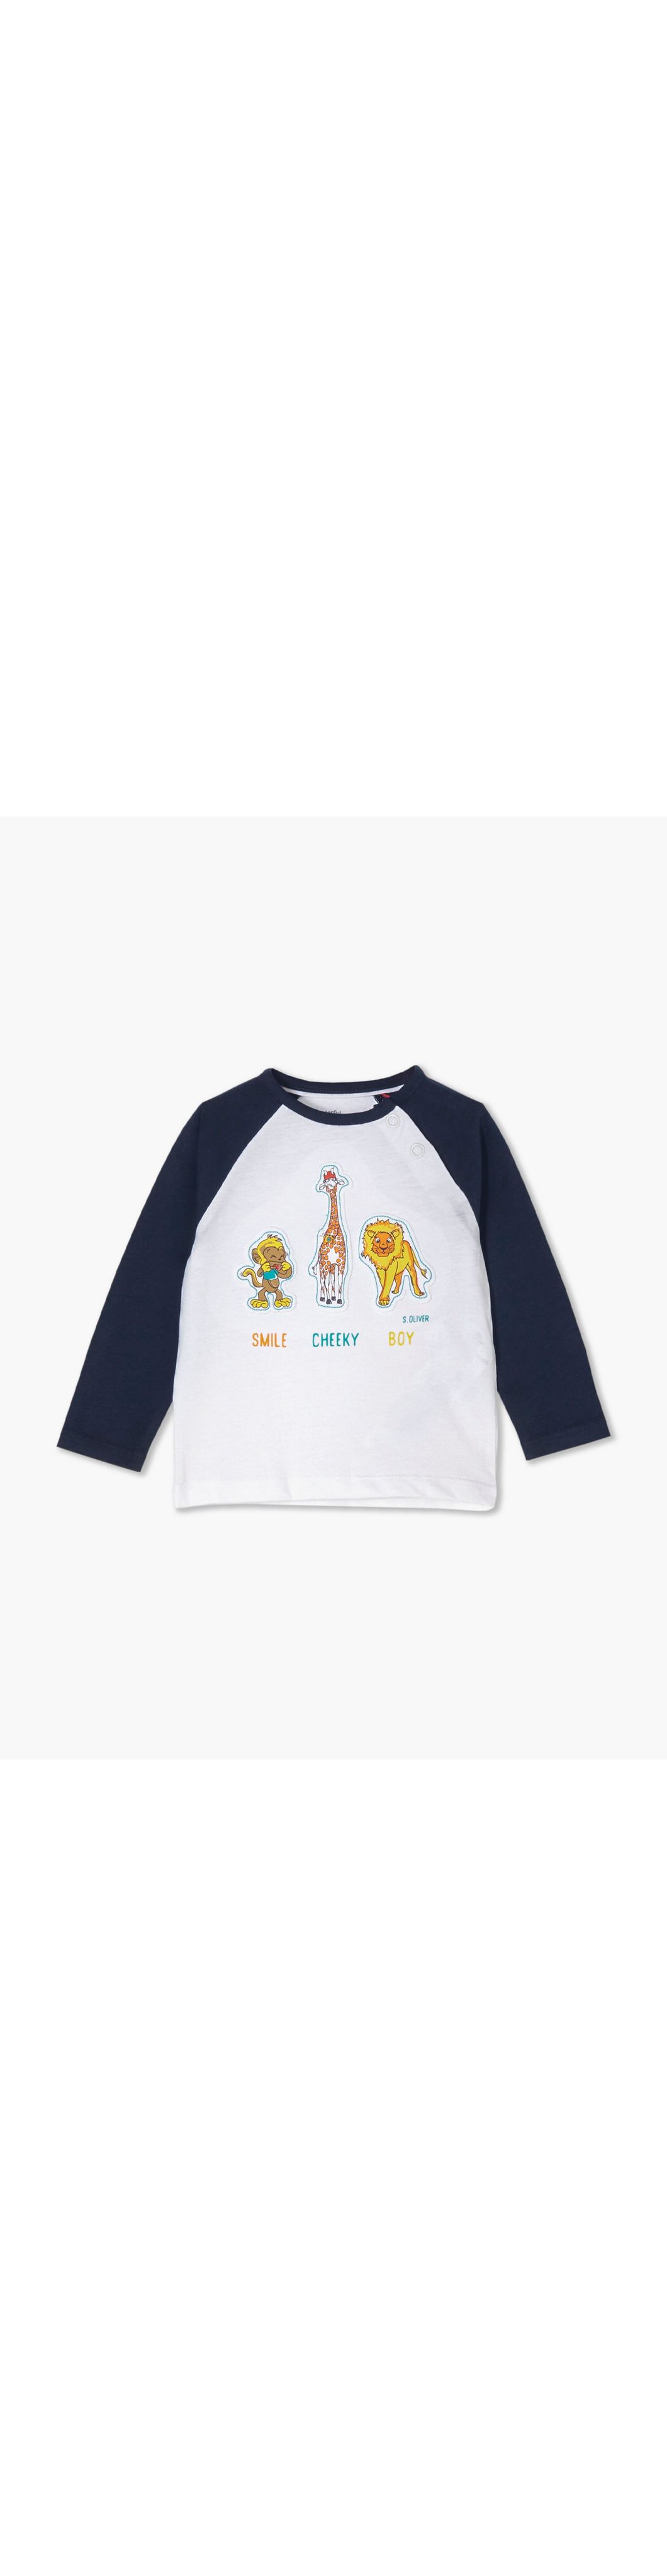 s.Oliver Baby Boys' T-Shirt